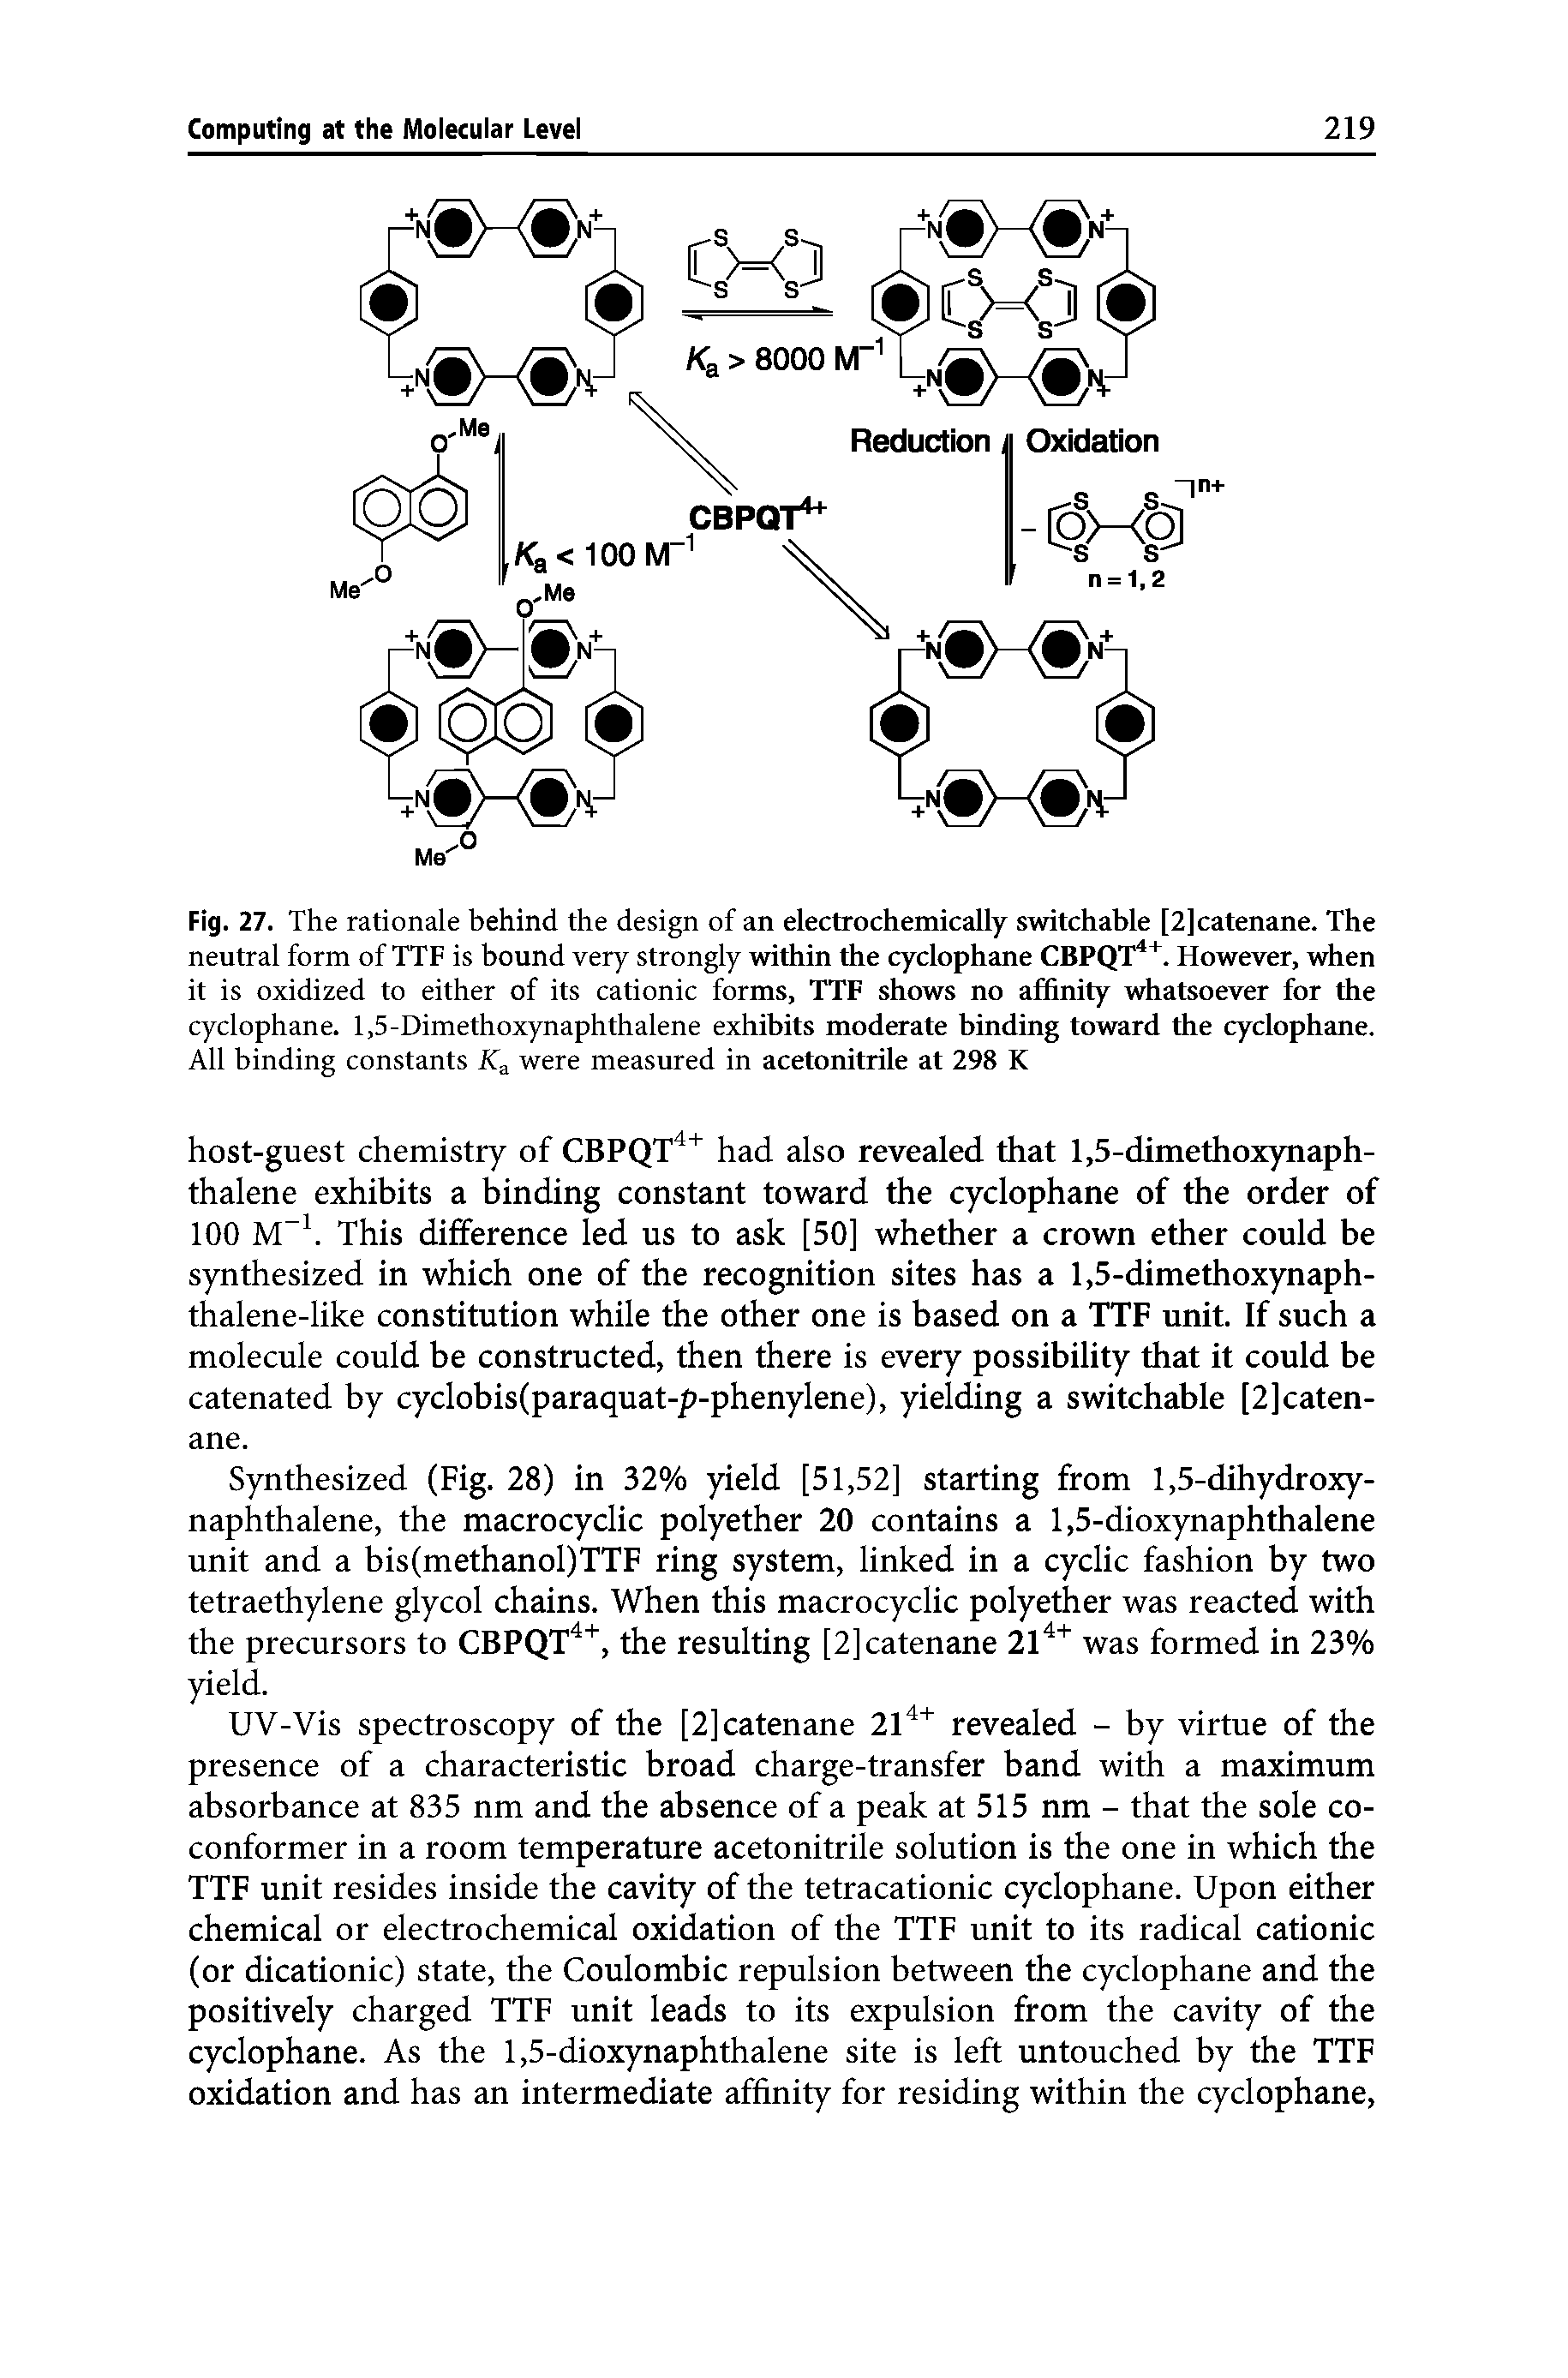 Fig. 27. The rationale behind the design of an electrochemically switchable [2]catenane. The neutral form of TTF is bound very strongly within the cyclophane CBPQT4+. However, when it is oxidized to either of its cationic forms, TTF shows no affinity whatsoever for the cyclophane. 1,5-Dimethoxynaphthalene exhibits moderate binding toward the cyclophane. All binding constants Ka were measured in acetonitrile at 298 K...